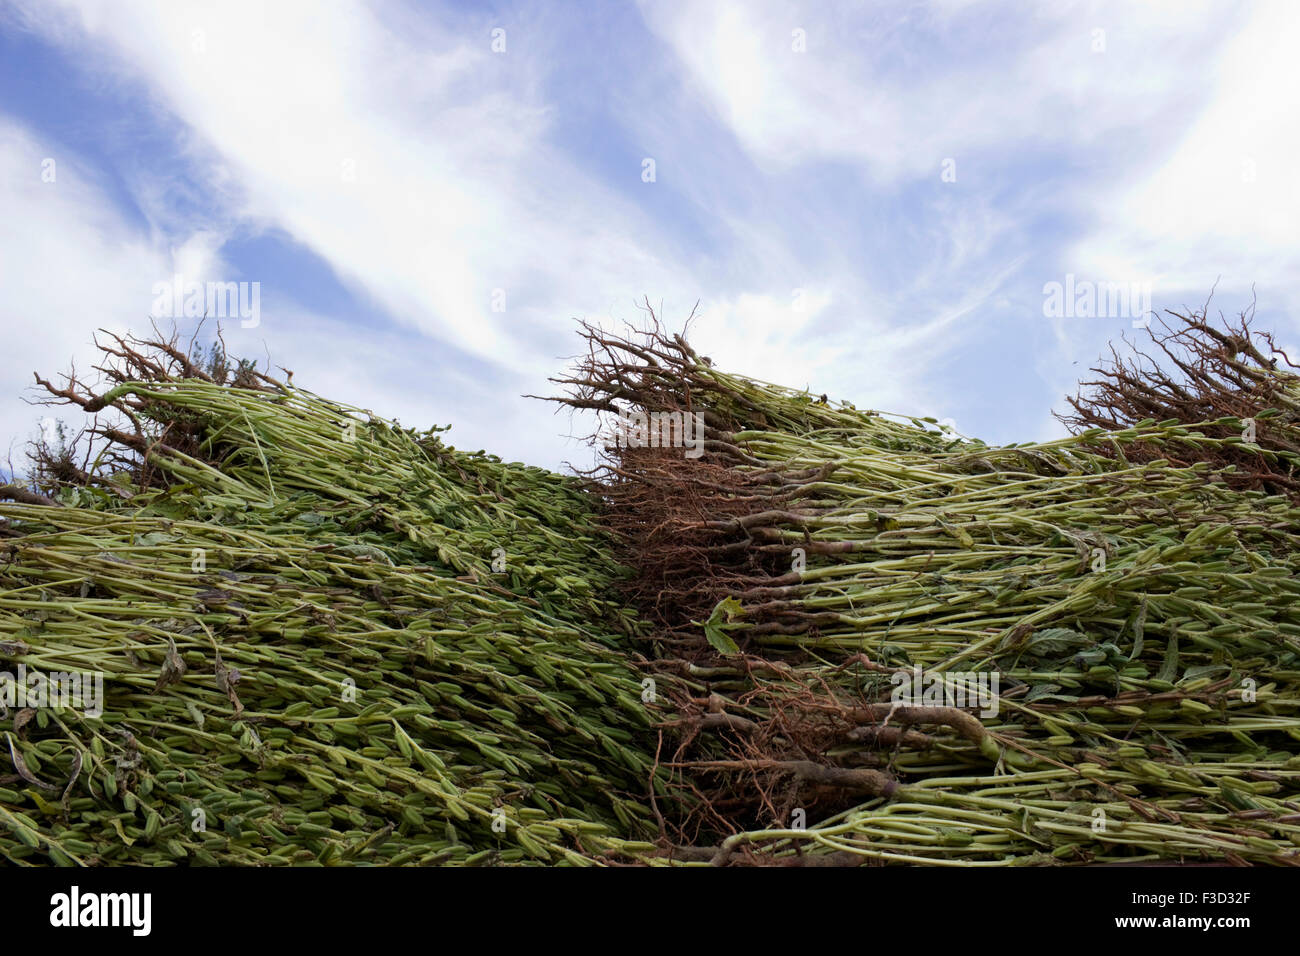 Close-up of  fresh harvest of sesame seedpod plant branchlets and roots against blue sky. Limnos, Greece Stock Photo